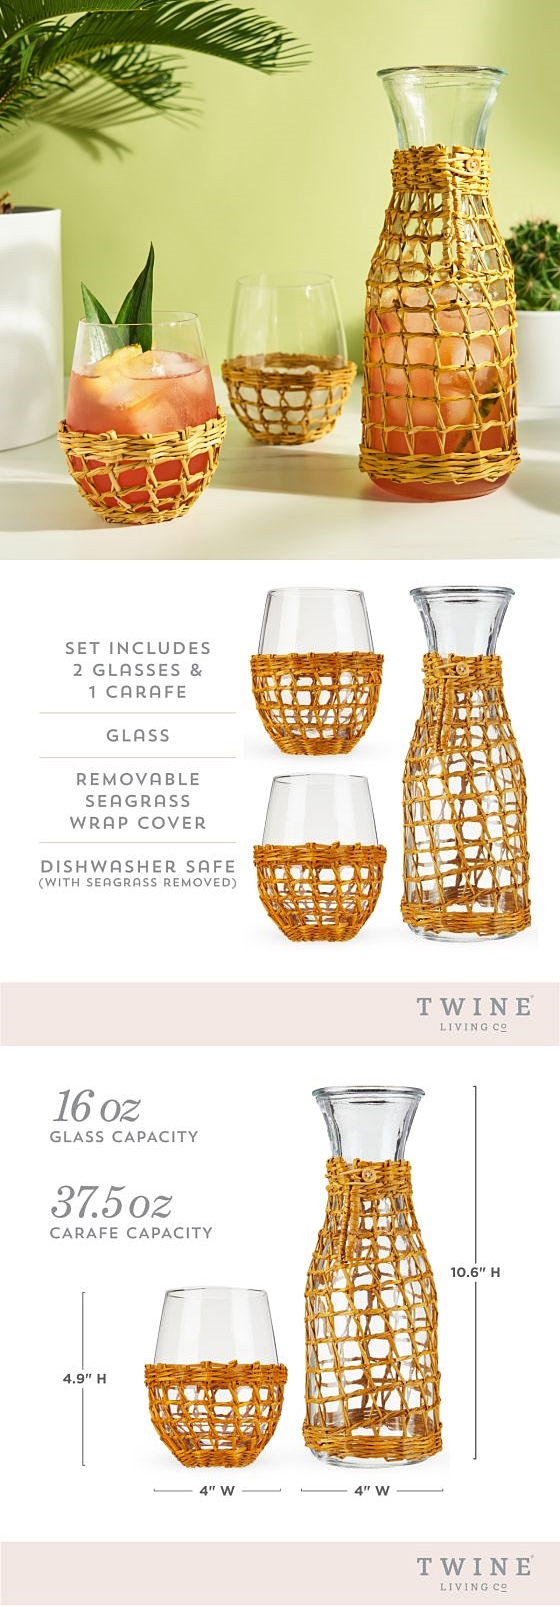 Seagrass-Wrapped 'Island' Carafe & Stemless Wine Glasses Set by Twine